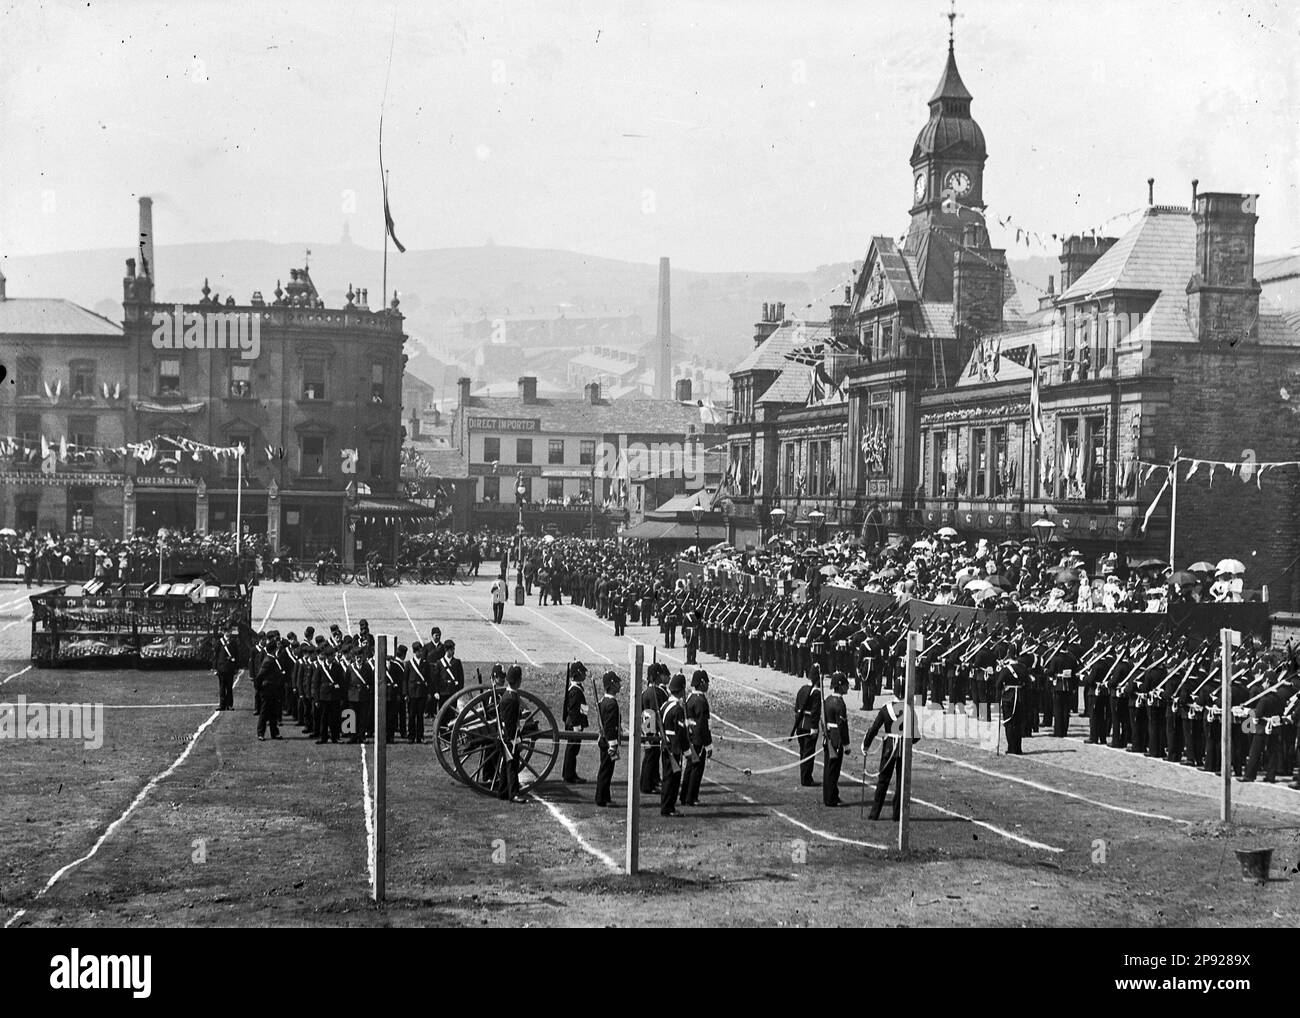 Around the UK - Preparation & events relating to the Coronation of King Edward VII in 1902 Stock Photo